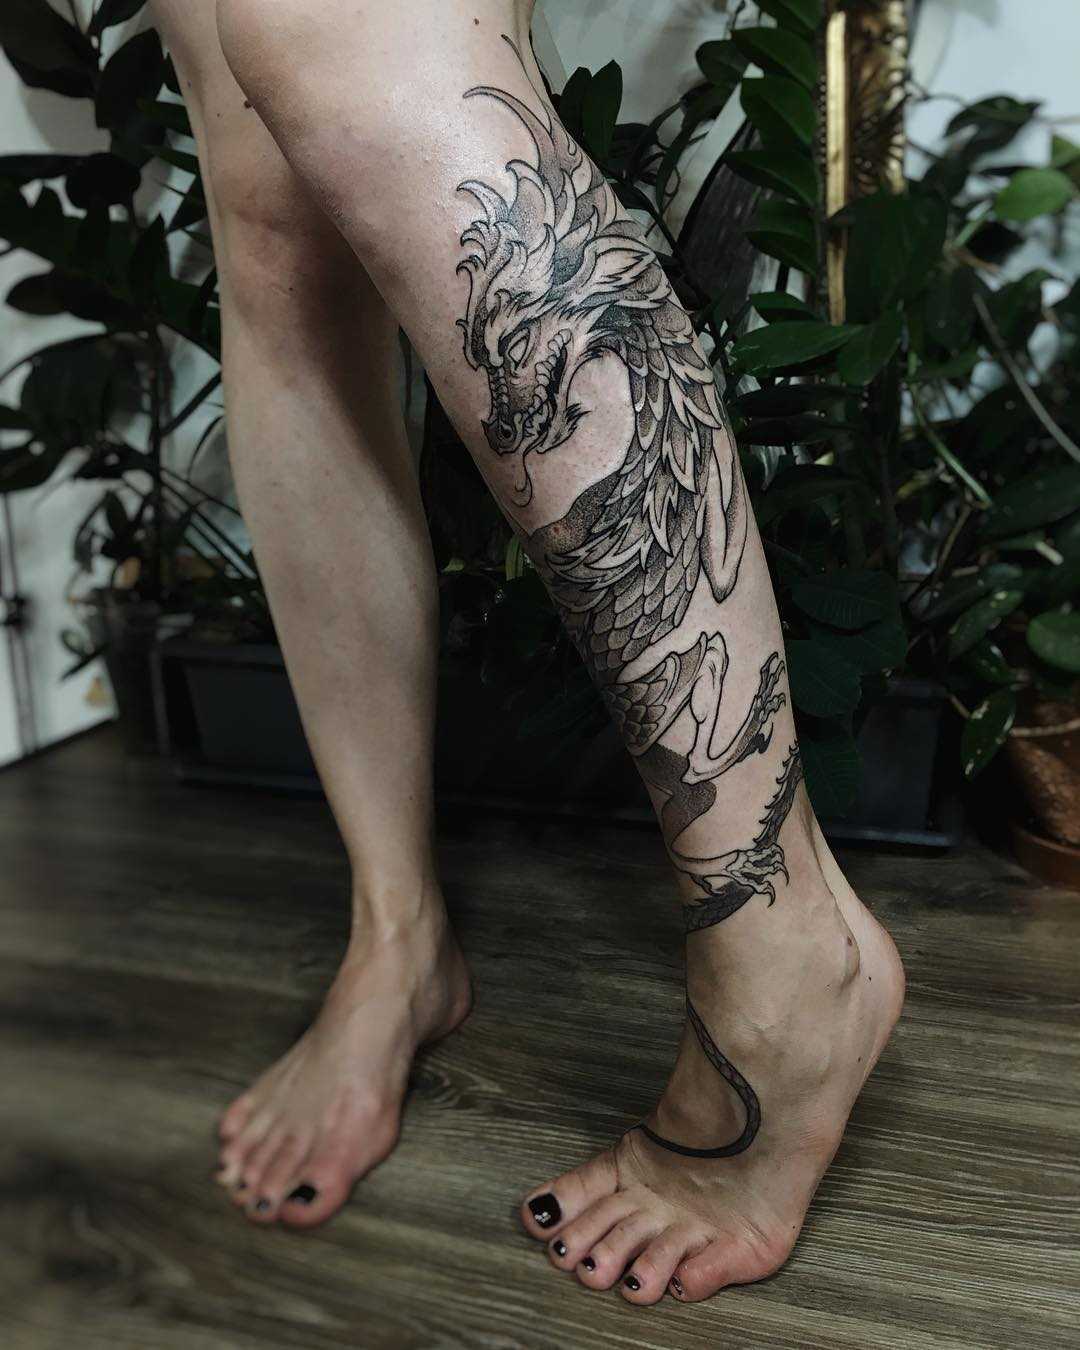 Calves: Least Painful Places To Get A Tattoo On The Body